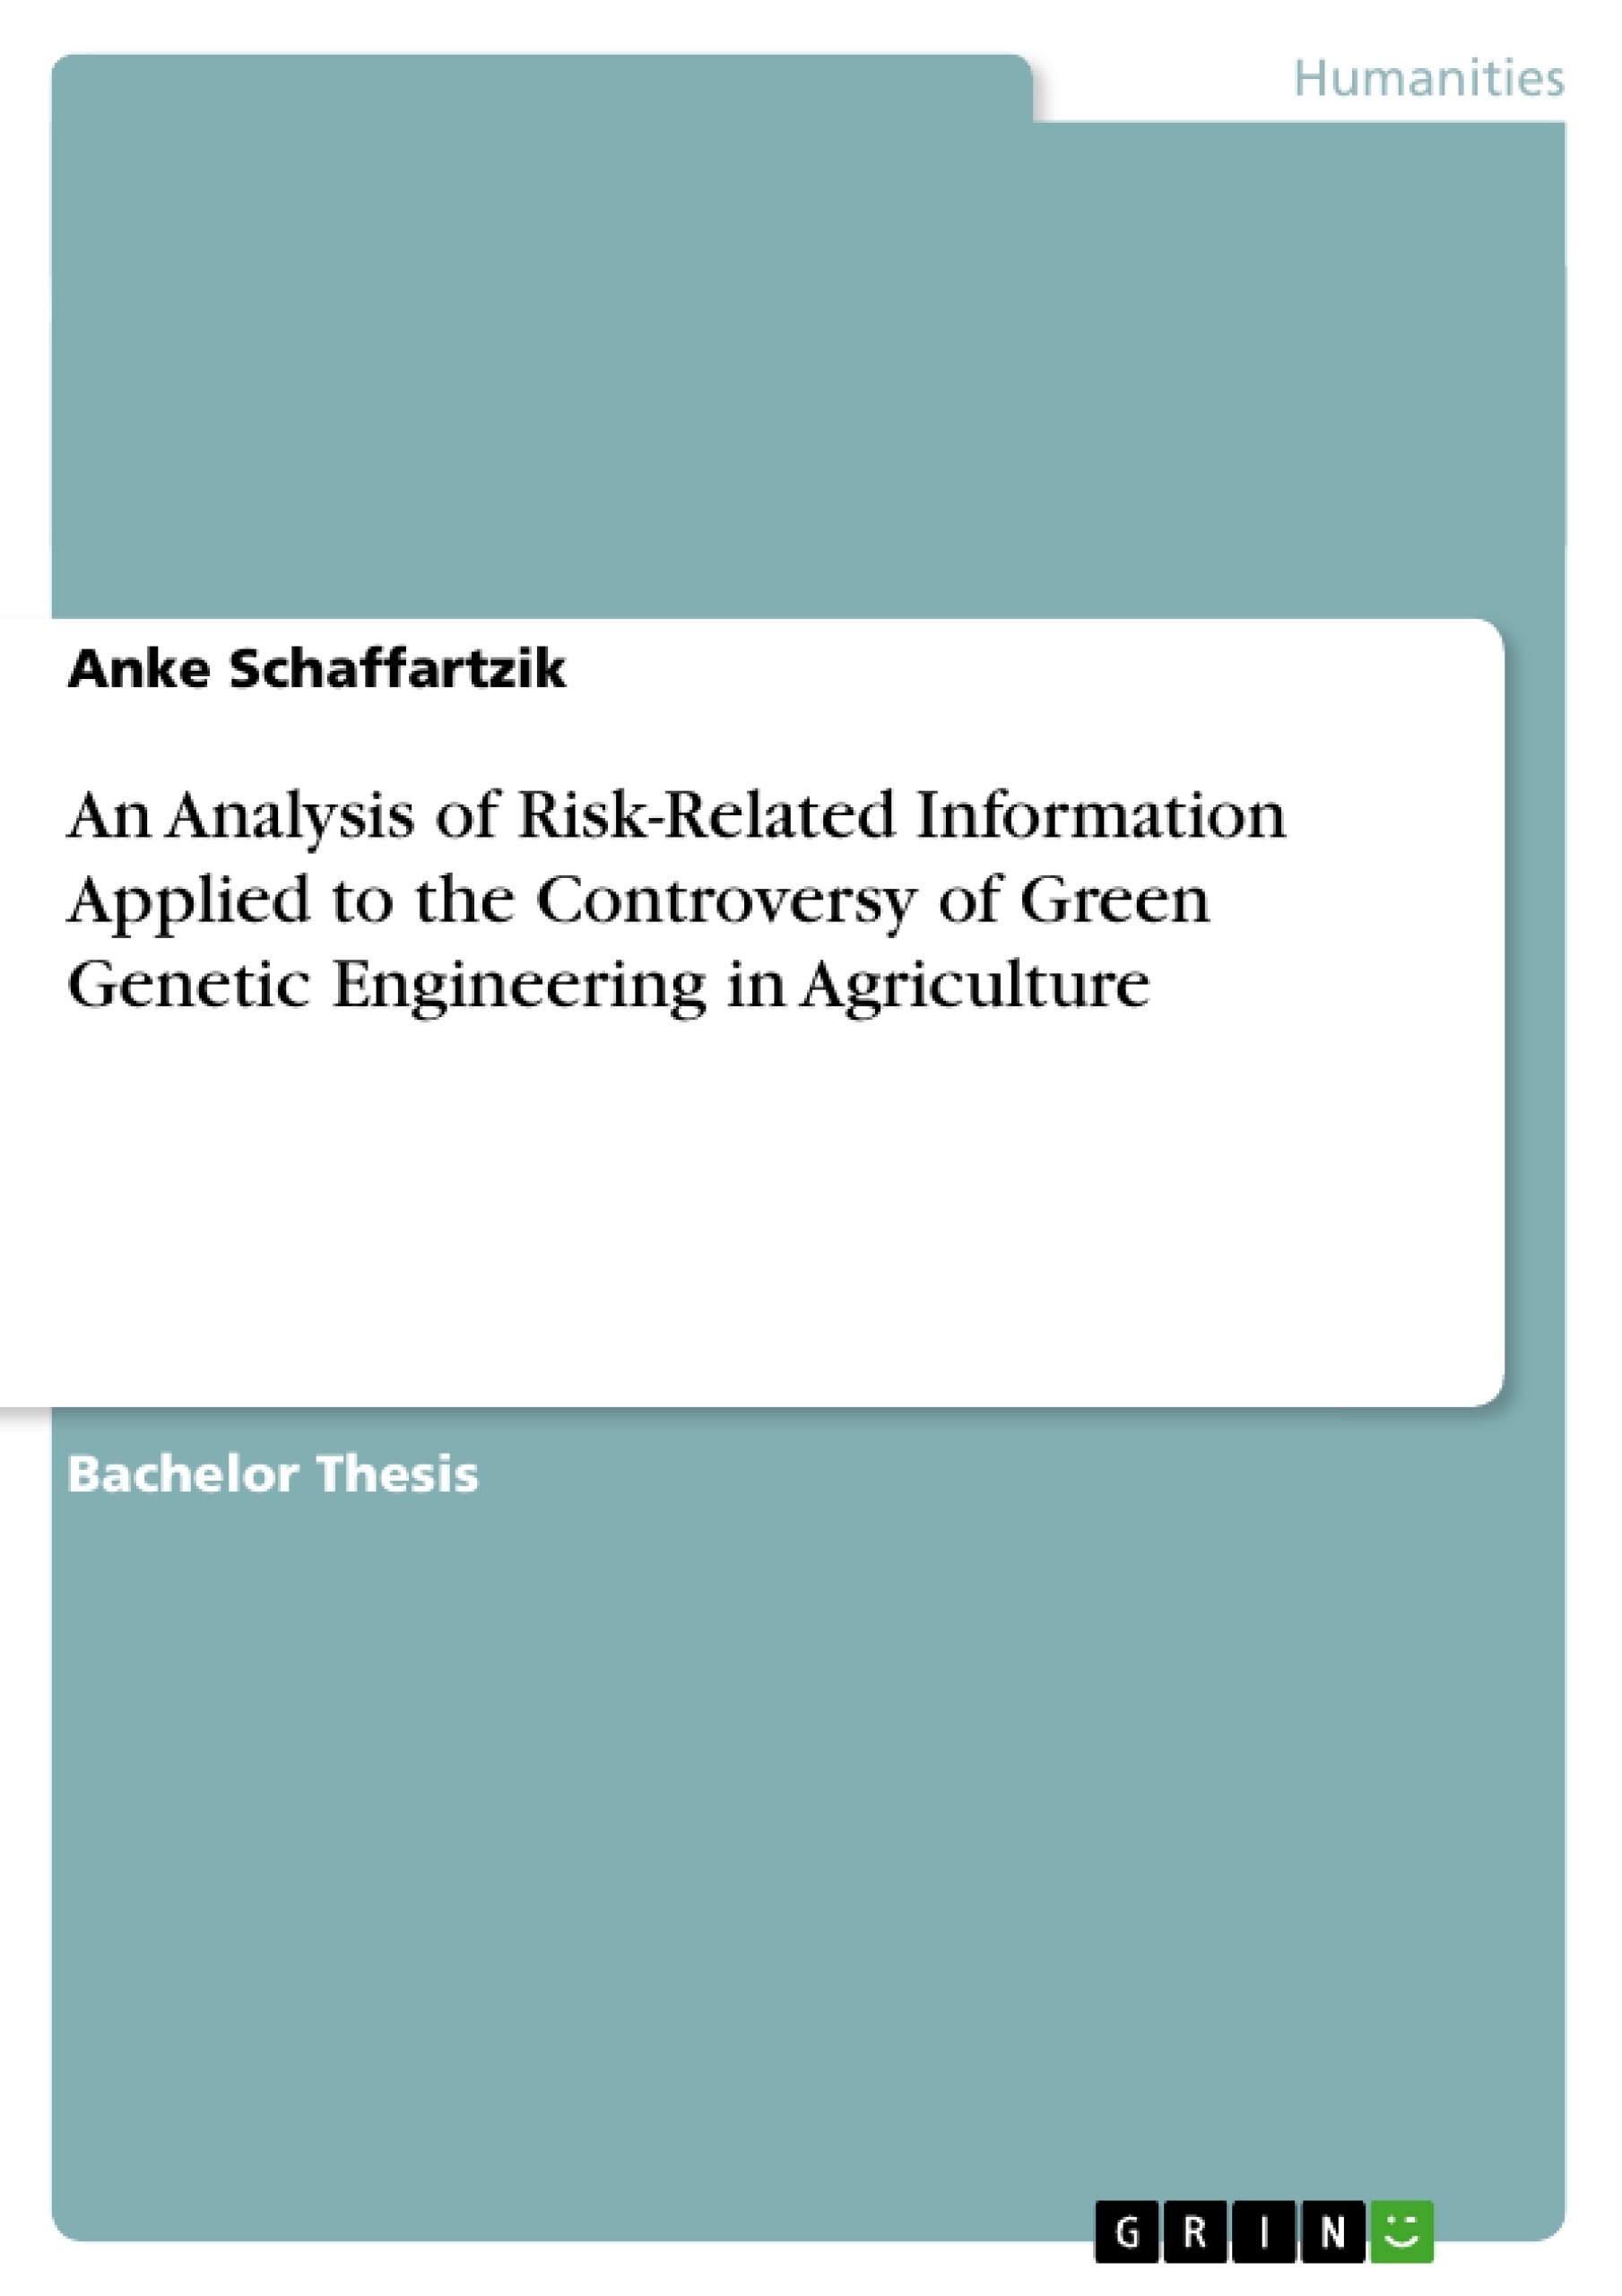 Title: An Analysis of Risk-Related Information Applied to the Controversy of Green Genetic Engineering in Agriculture